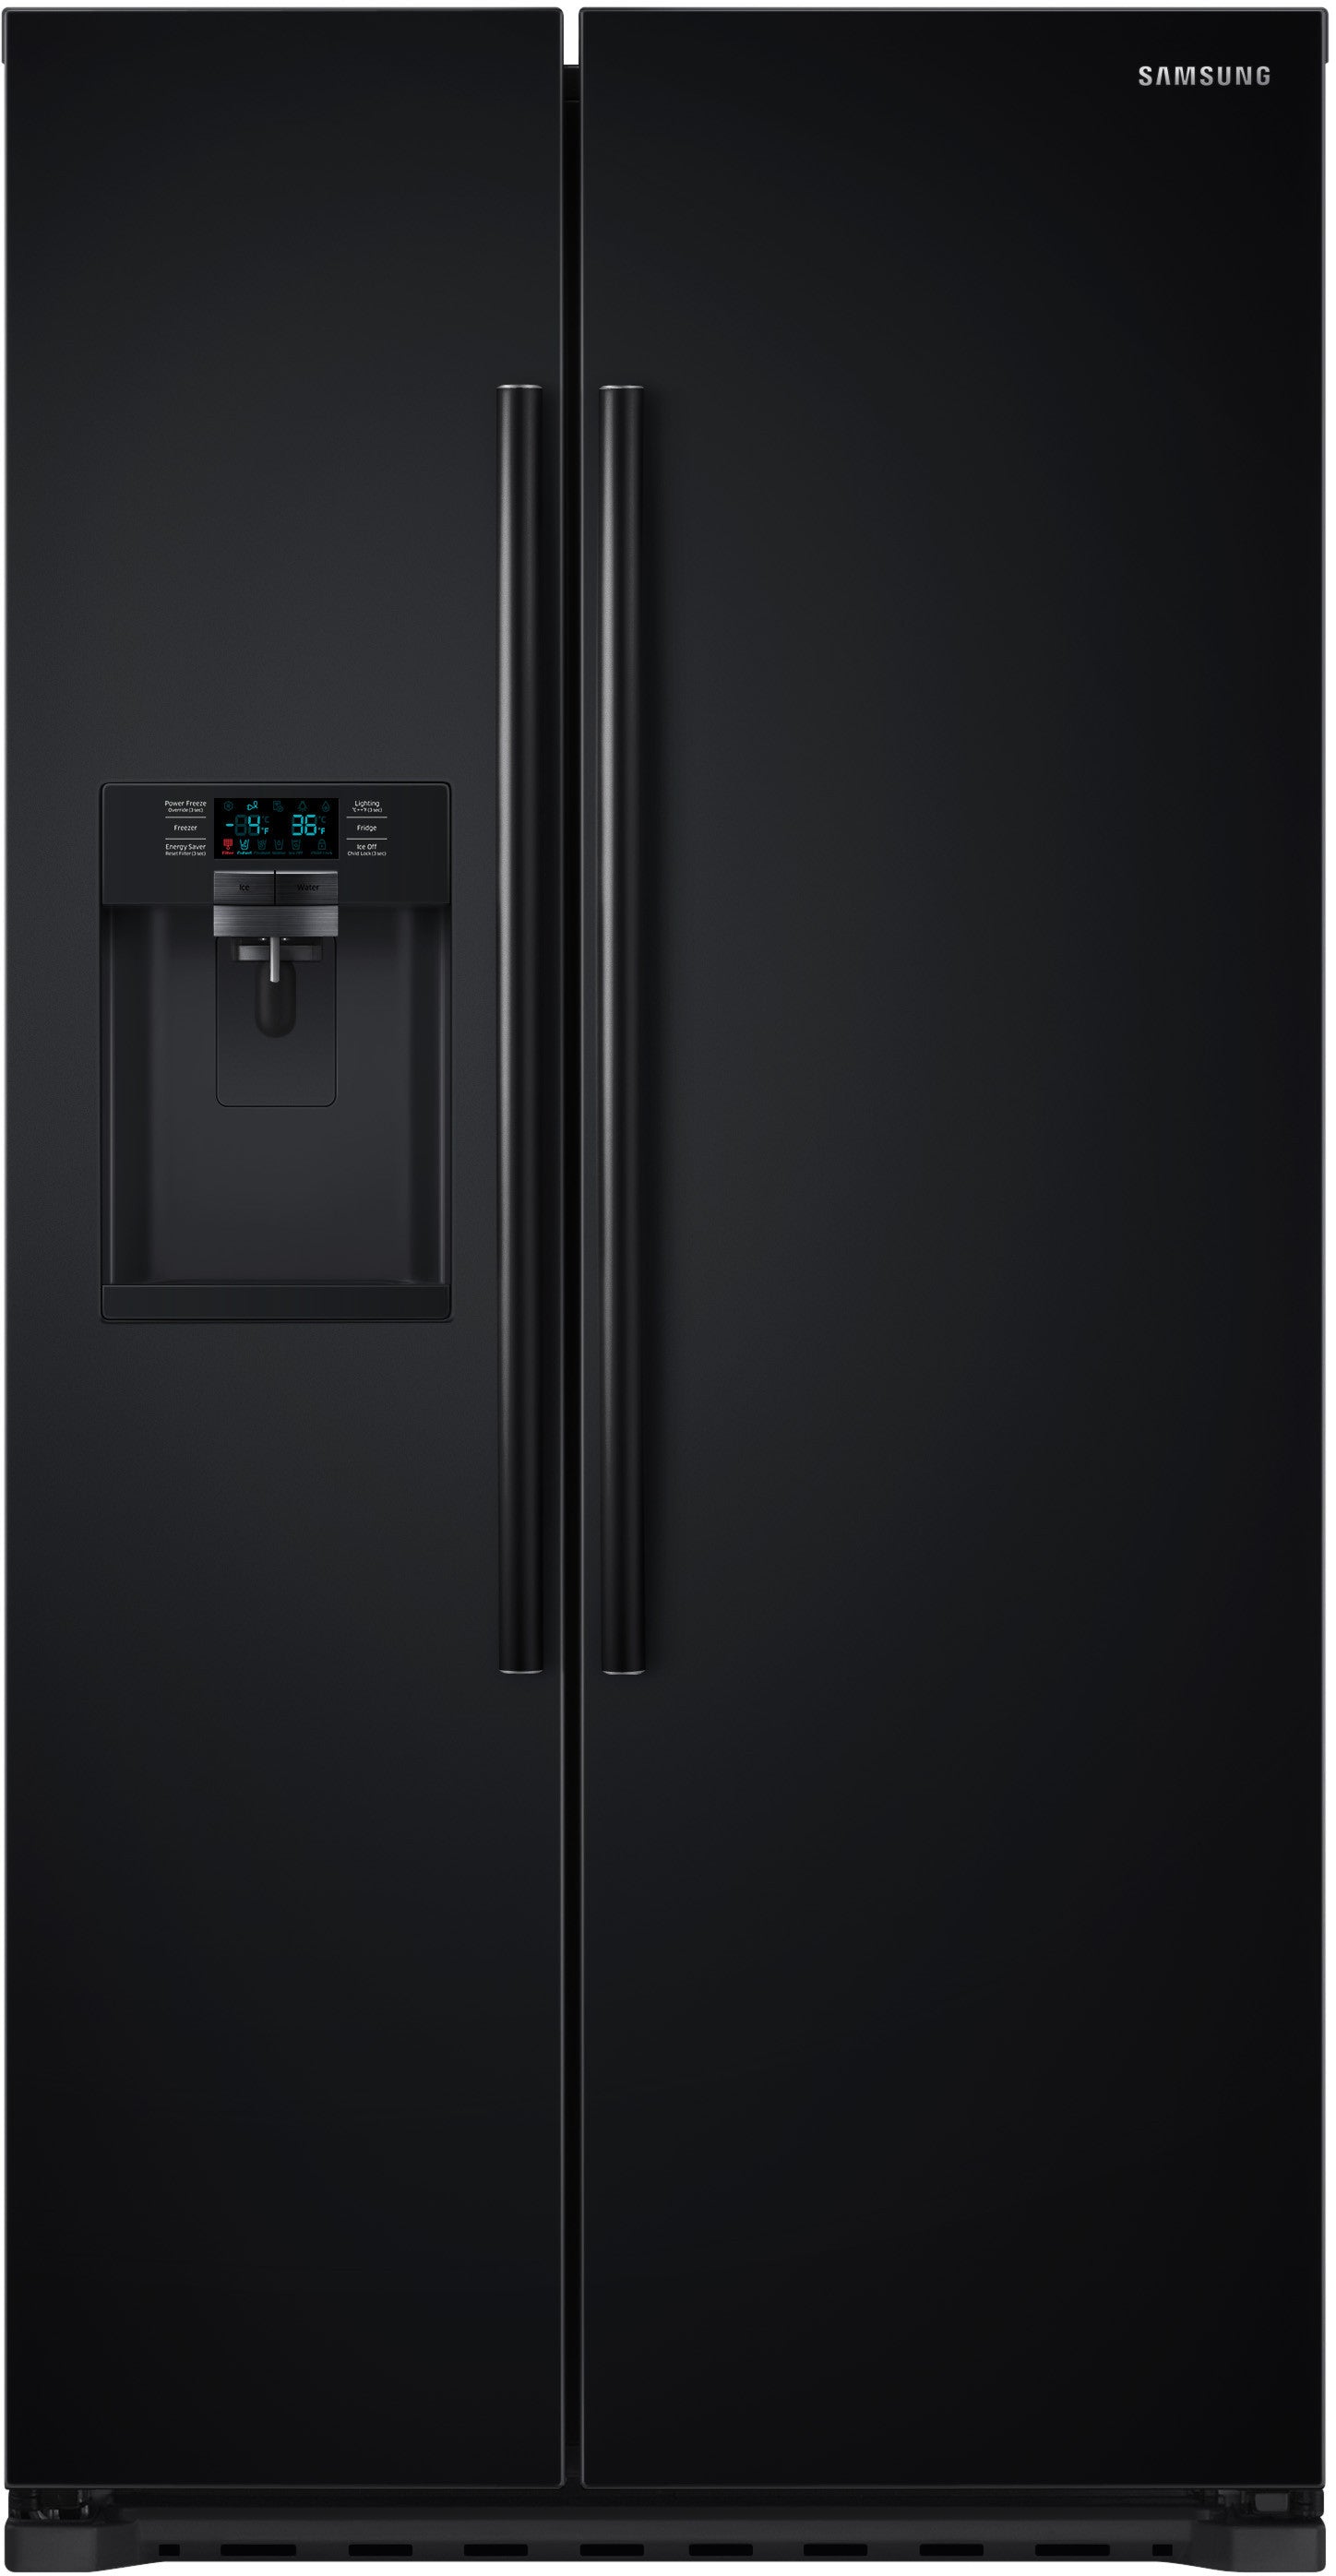 Samsung RS22HDHPNBC/AA 22 Cu. Ft. Counter Depth Side-by-side Refrigerator - Samsung Parts USA